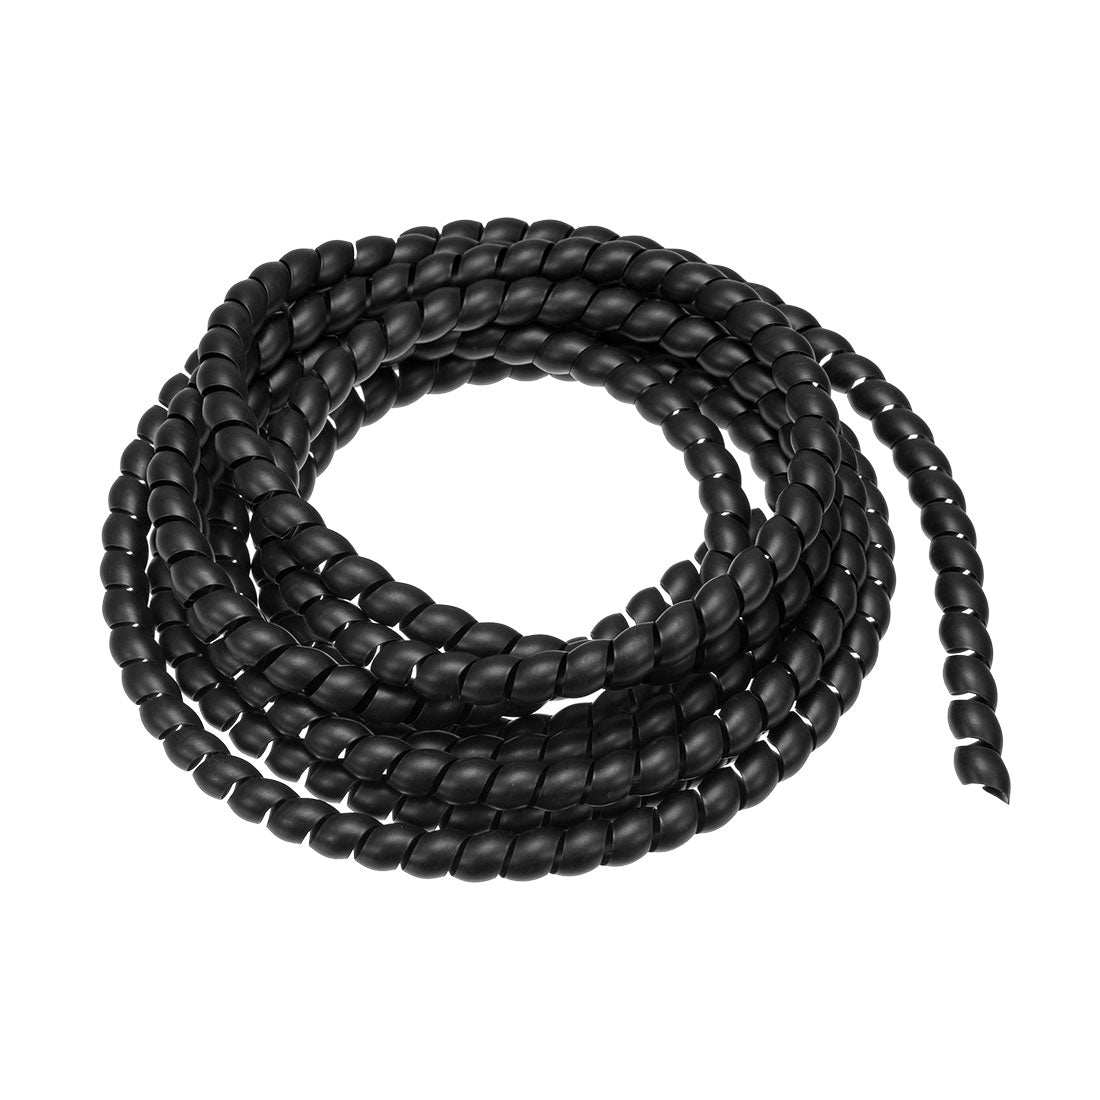 uxcell Uxcell Flexible Spiral Tube Wrap Cable Management Sleeve 8mm x 10mm Computer Wire Manage Cord 3.0 Meters Length Black